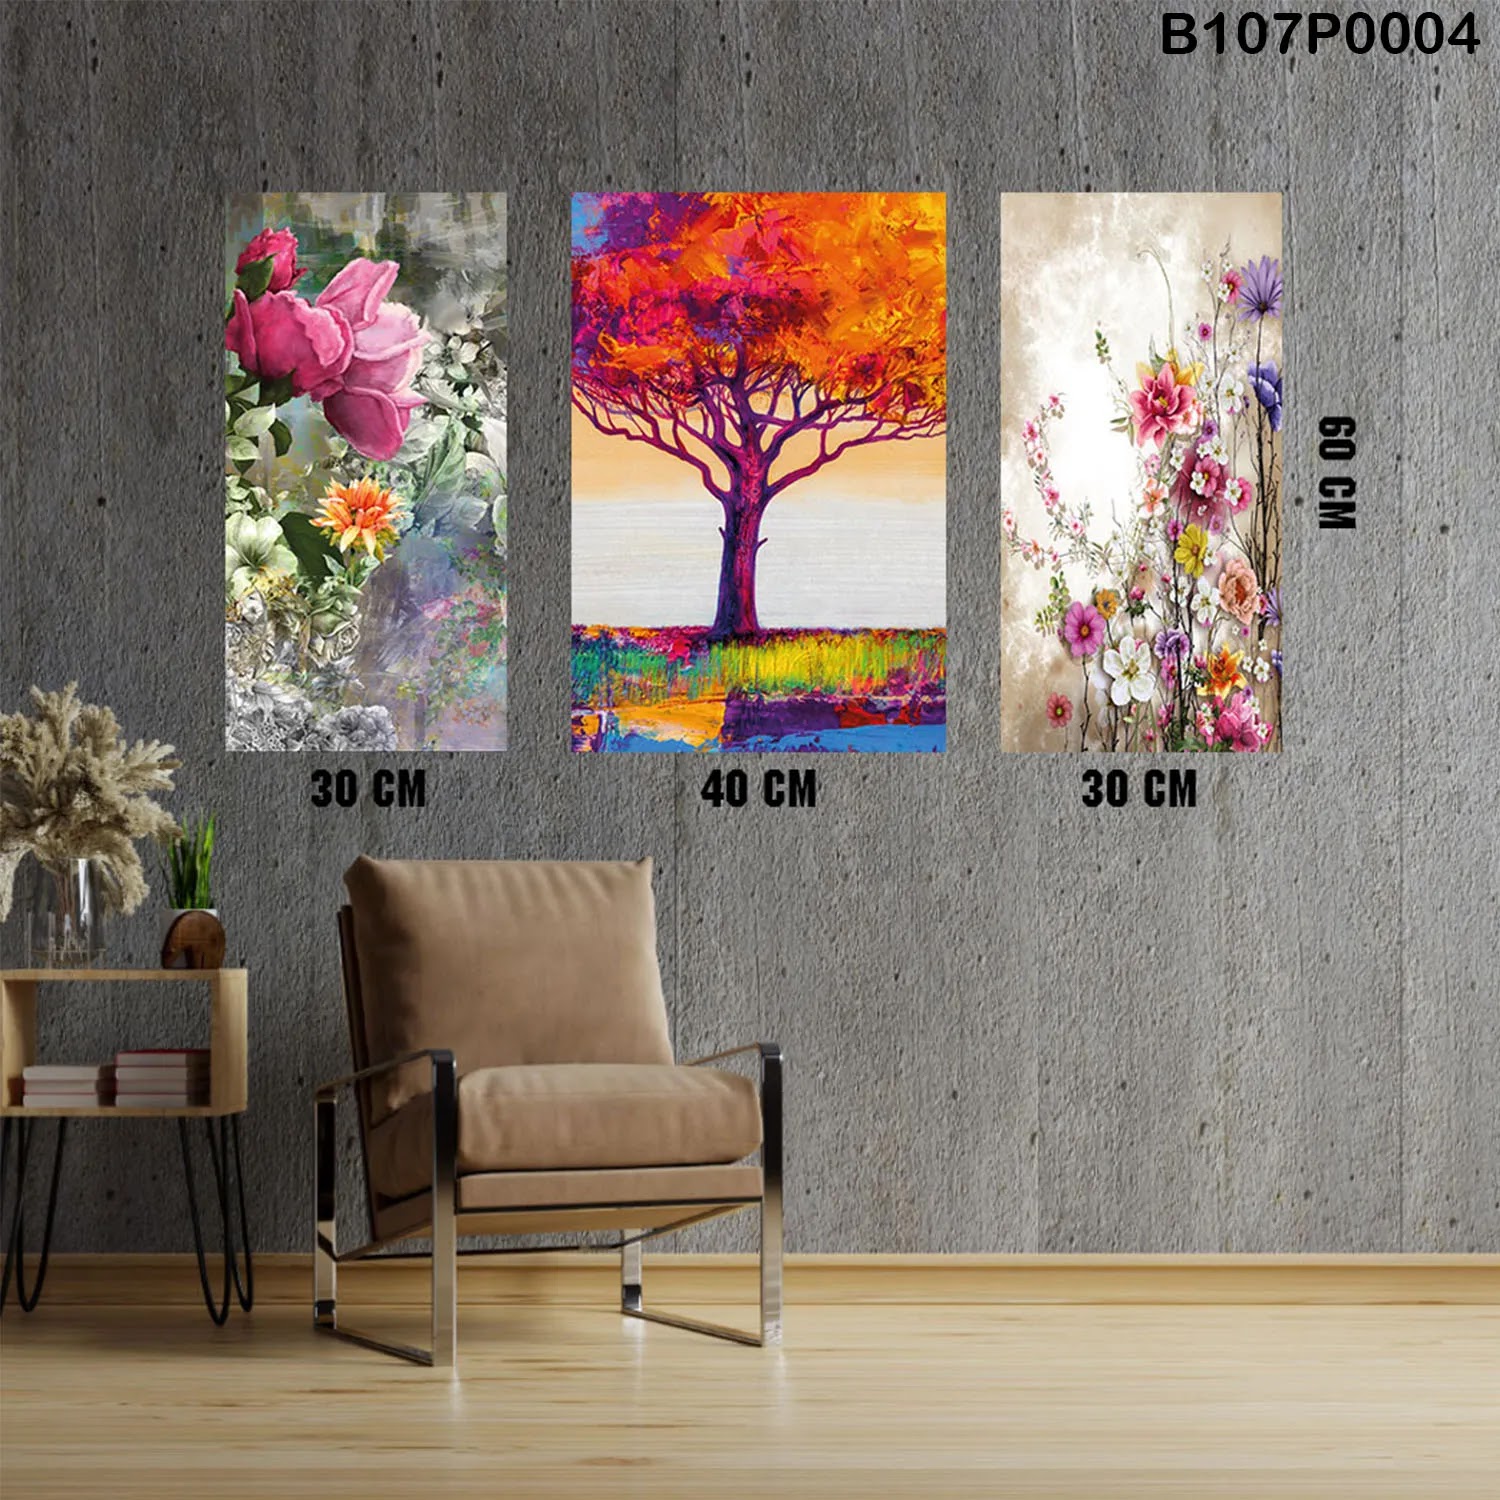 Triptych pane with (flowers - Autumn tree - juri roses)